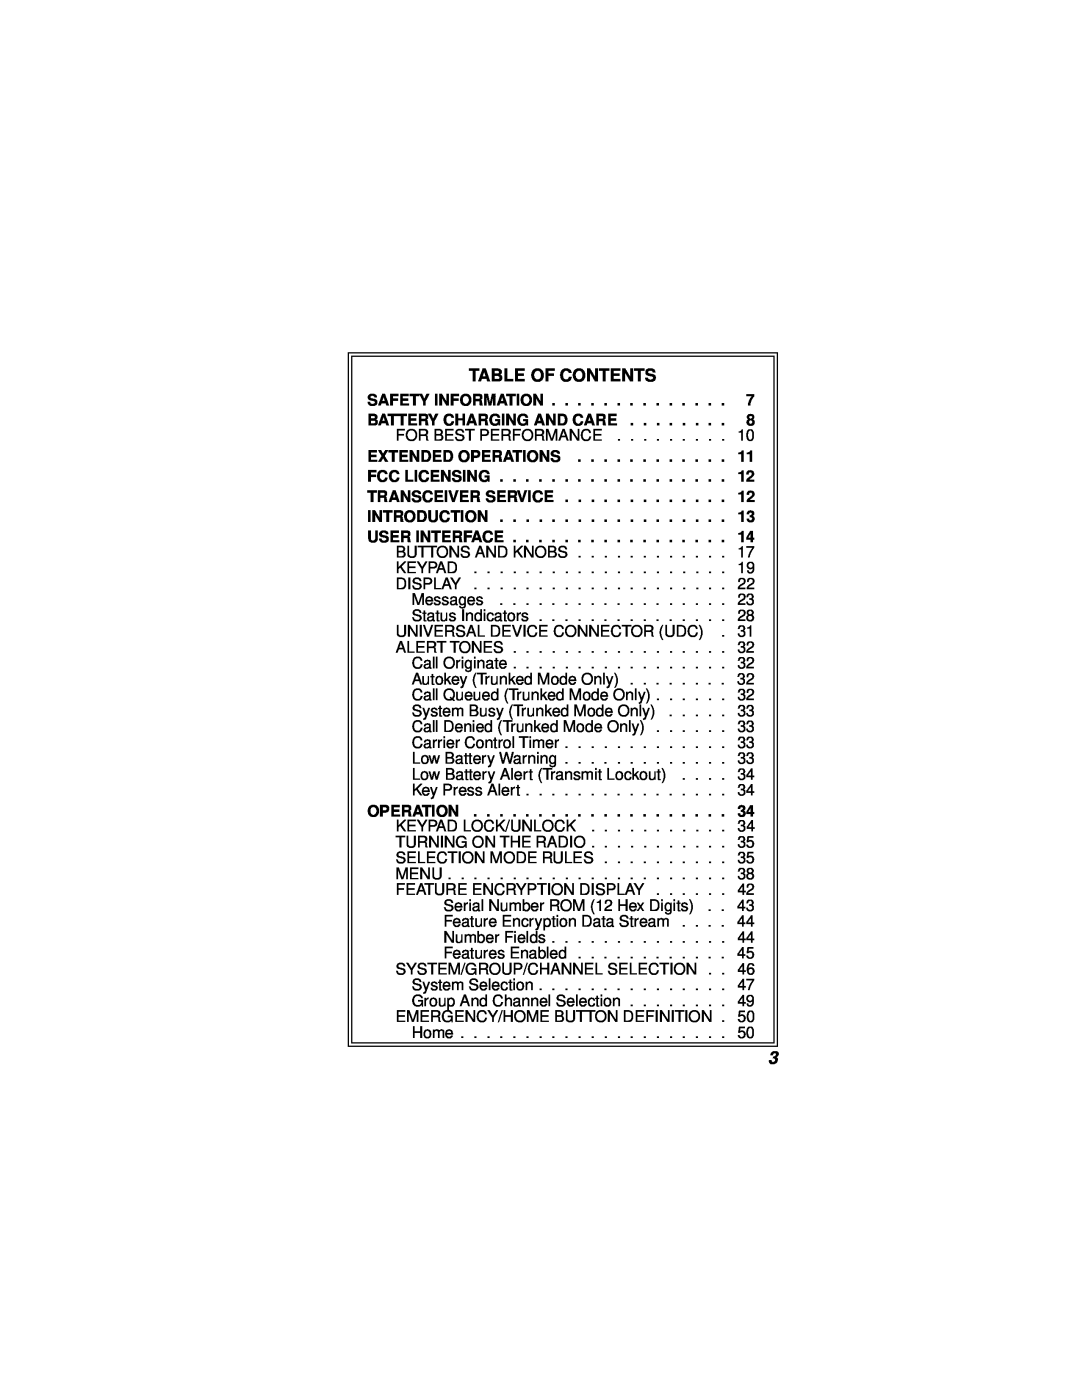 Ericsson LBI-38732E Table Of Contents, Safety Information, Battery Charging And Care, Extended Operations, Fcc Licensing 